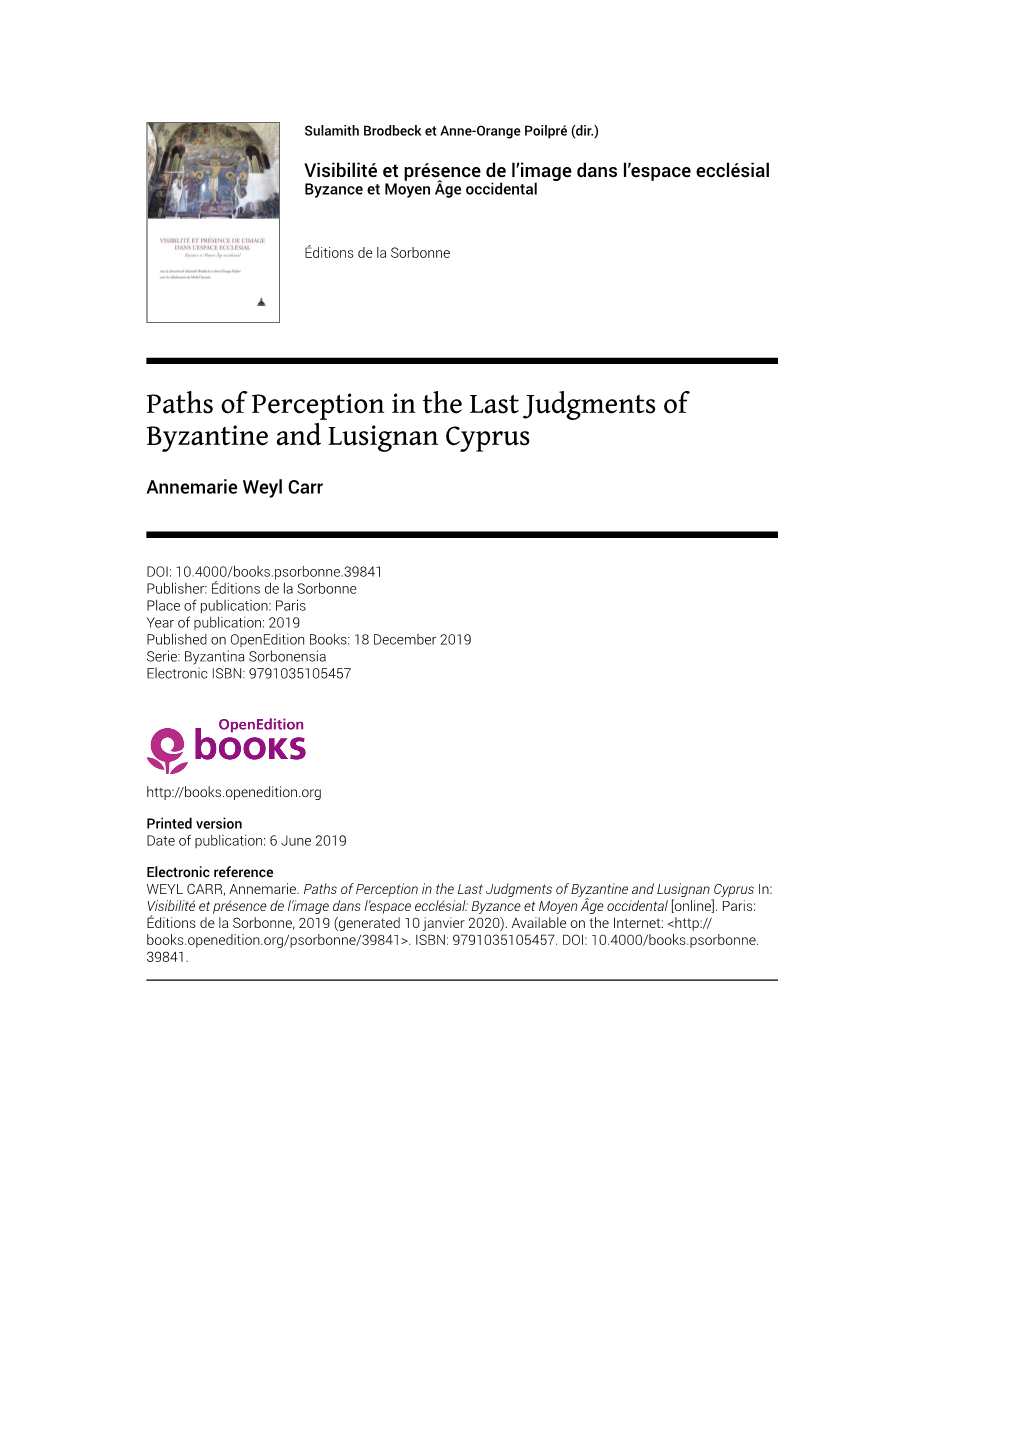 Paths of Perception in the Last Judgments of Byzantine and Lusignan Cyprus